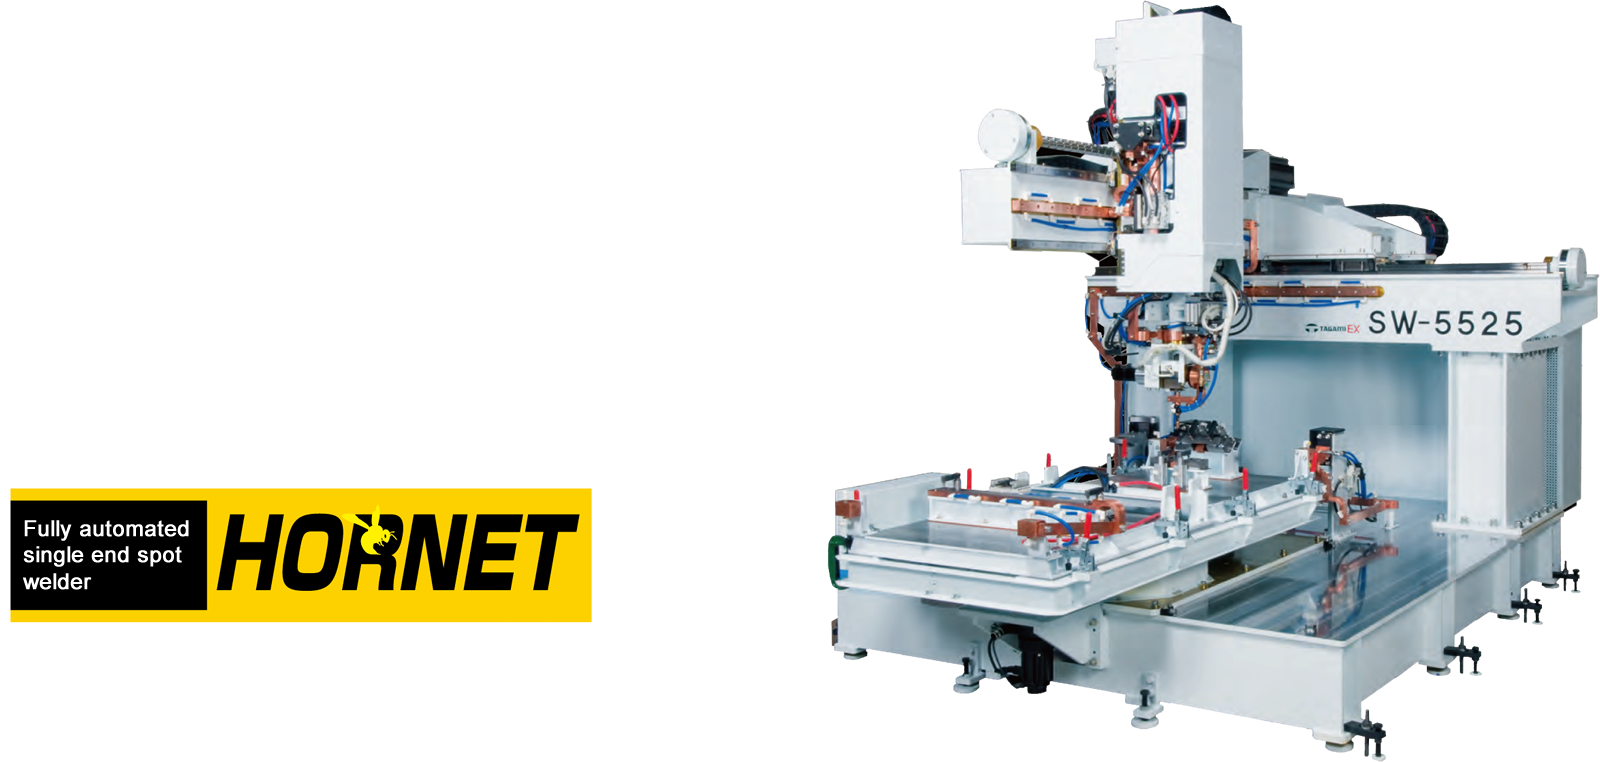 Work faster and freer. Fully automated single end spot welder HORNET